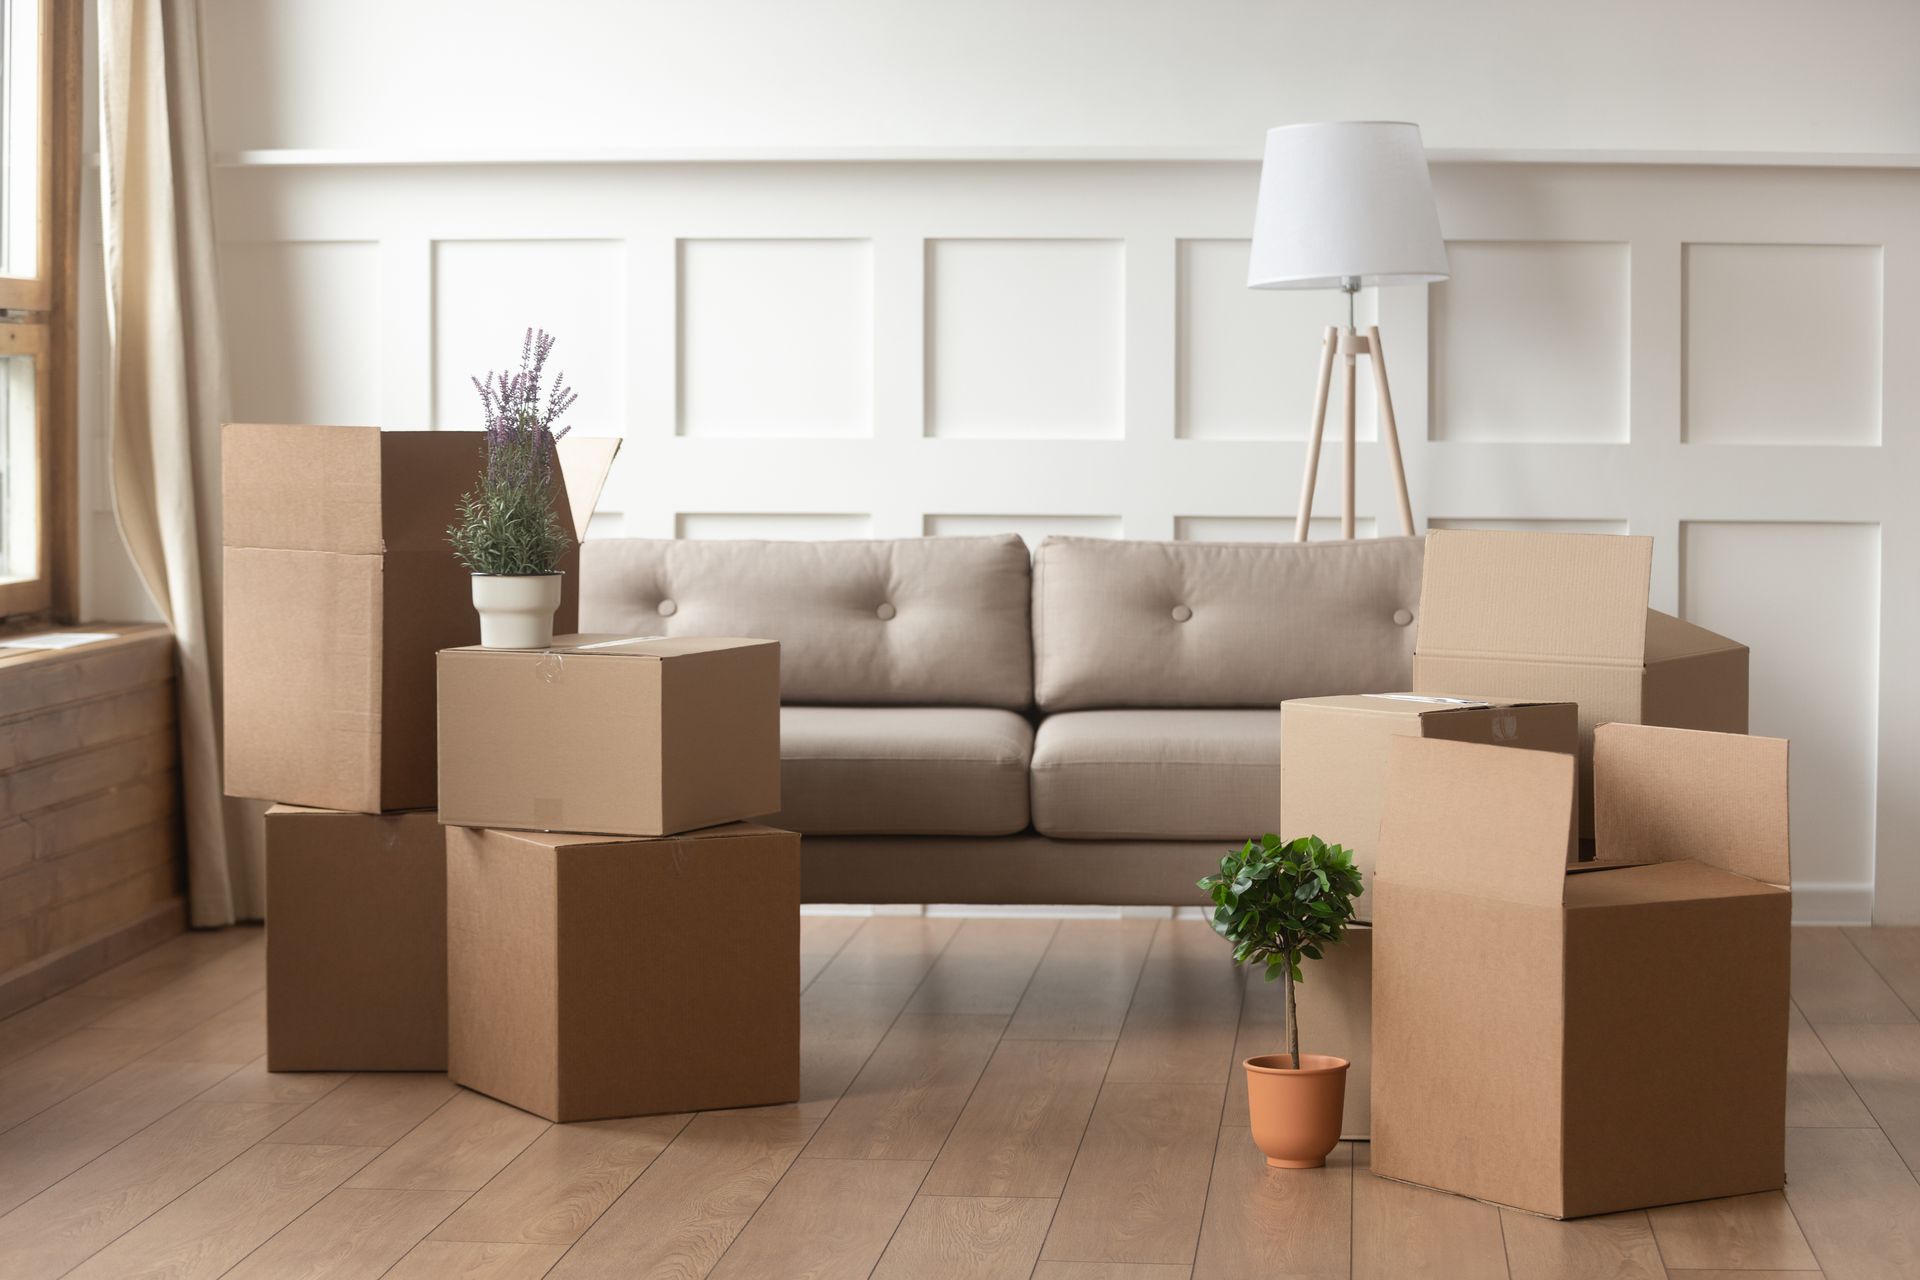 Modern living room on moving day, with neatly stacked cardboard boxes of various sizes and labels.